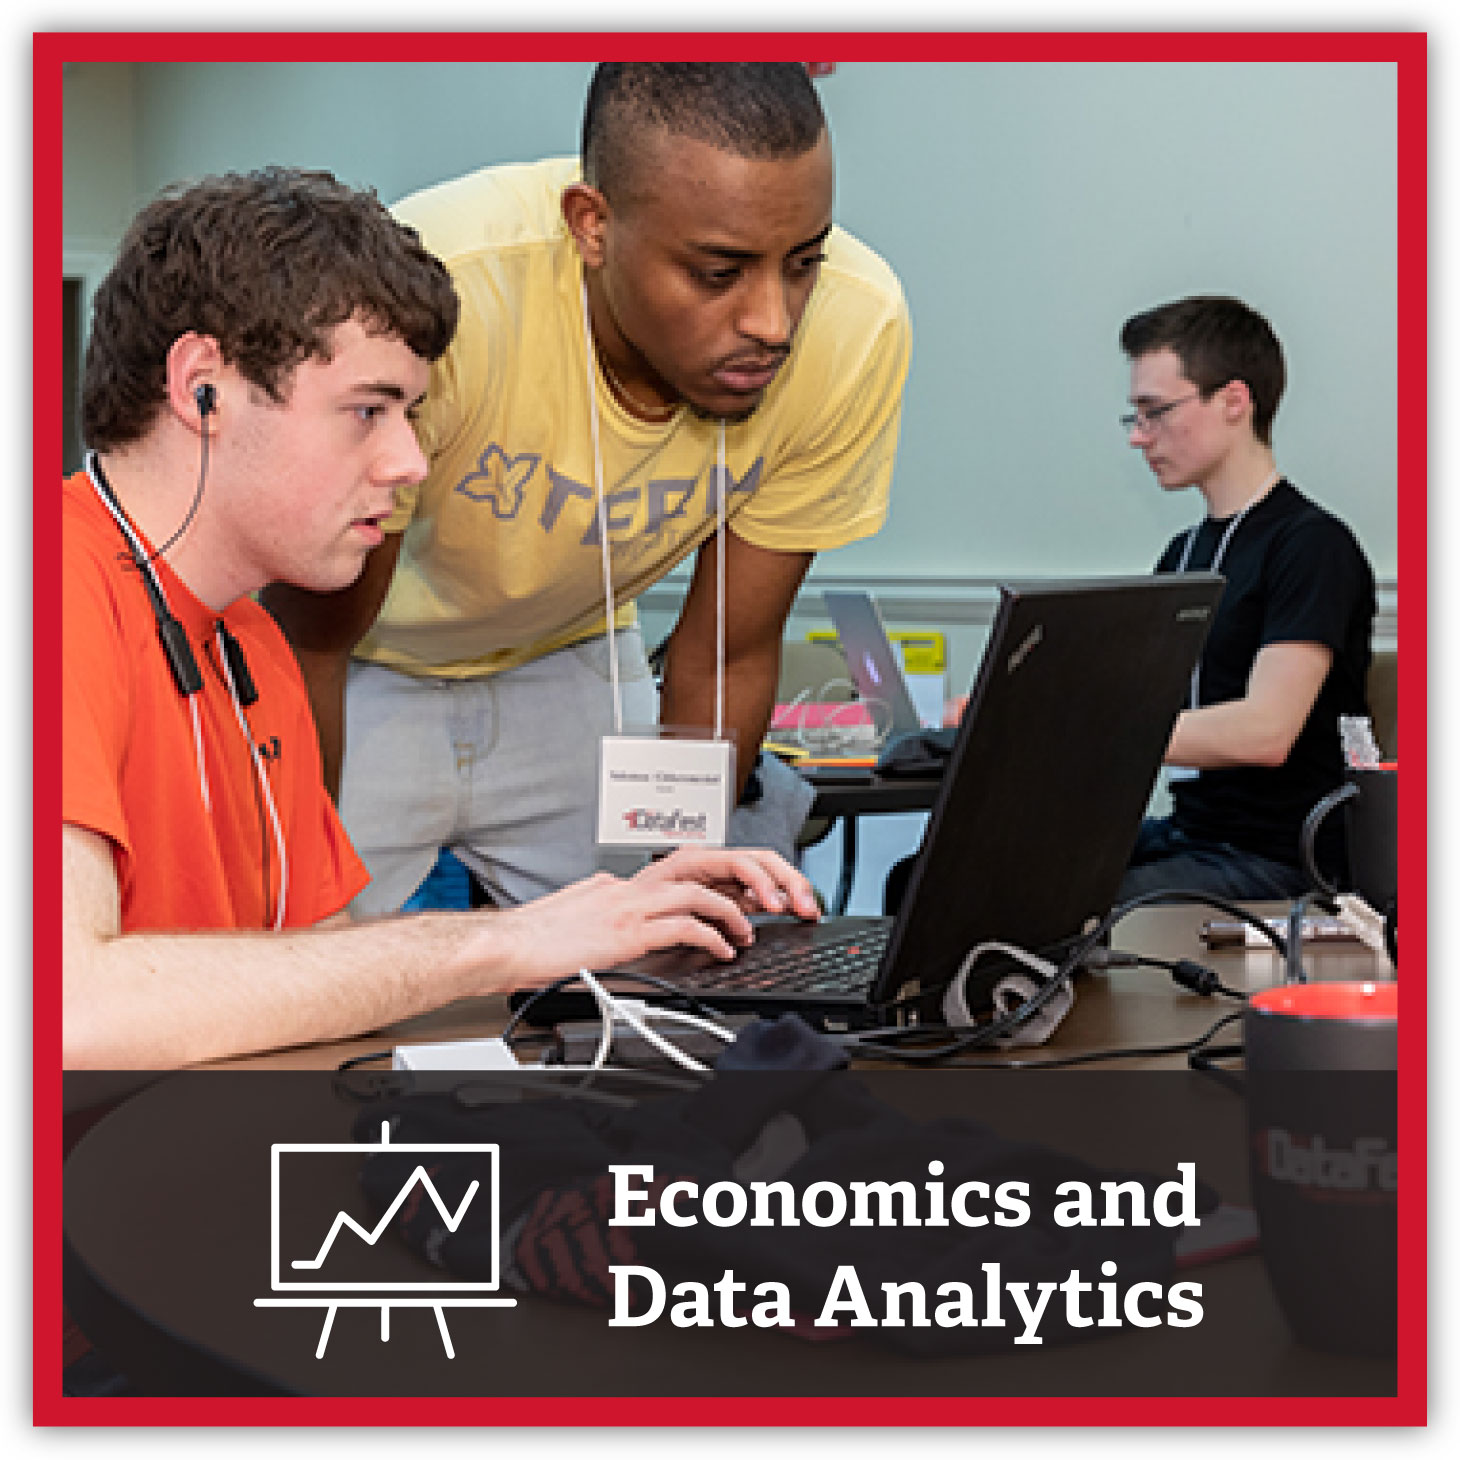 Students reviewing data on a computer. Economics and Data Analytics.